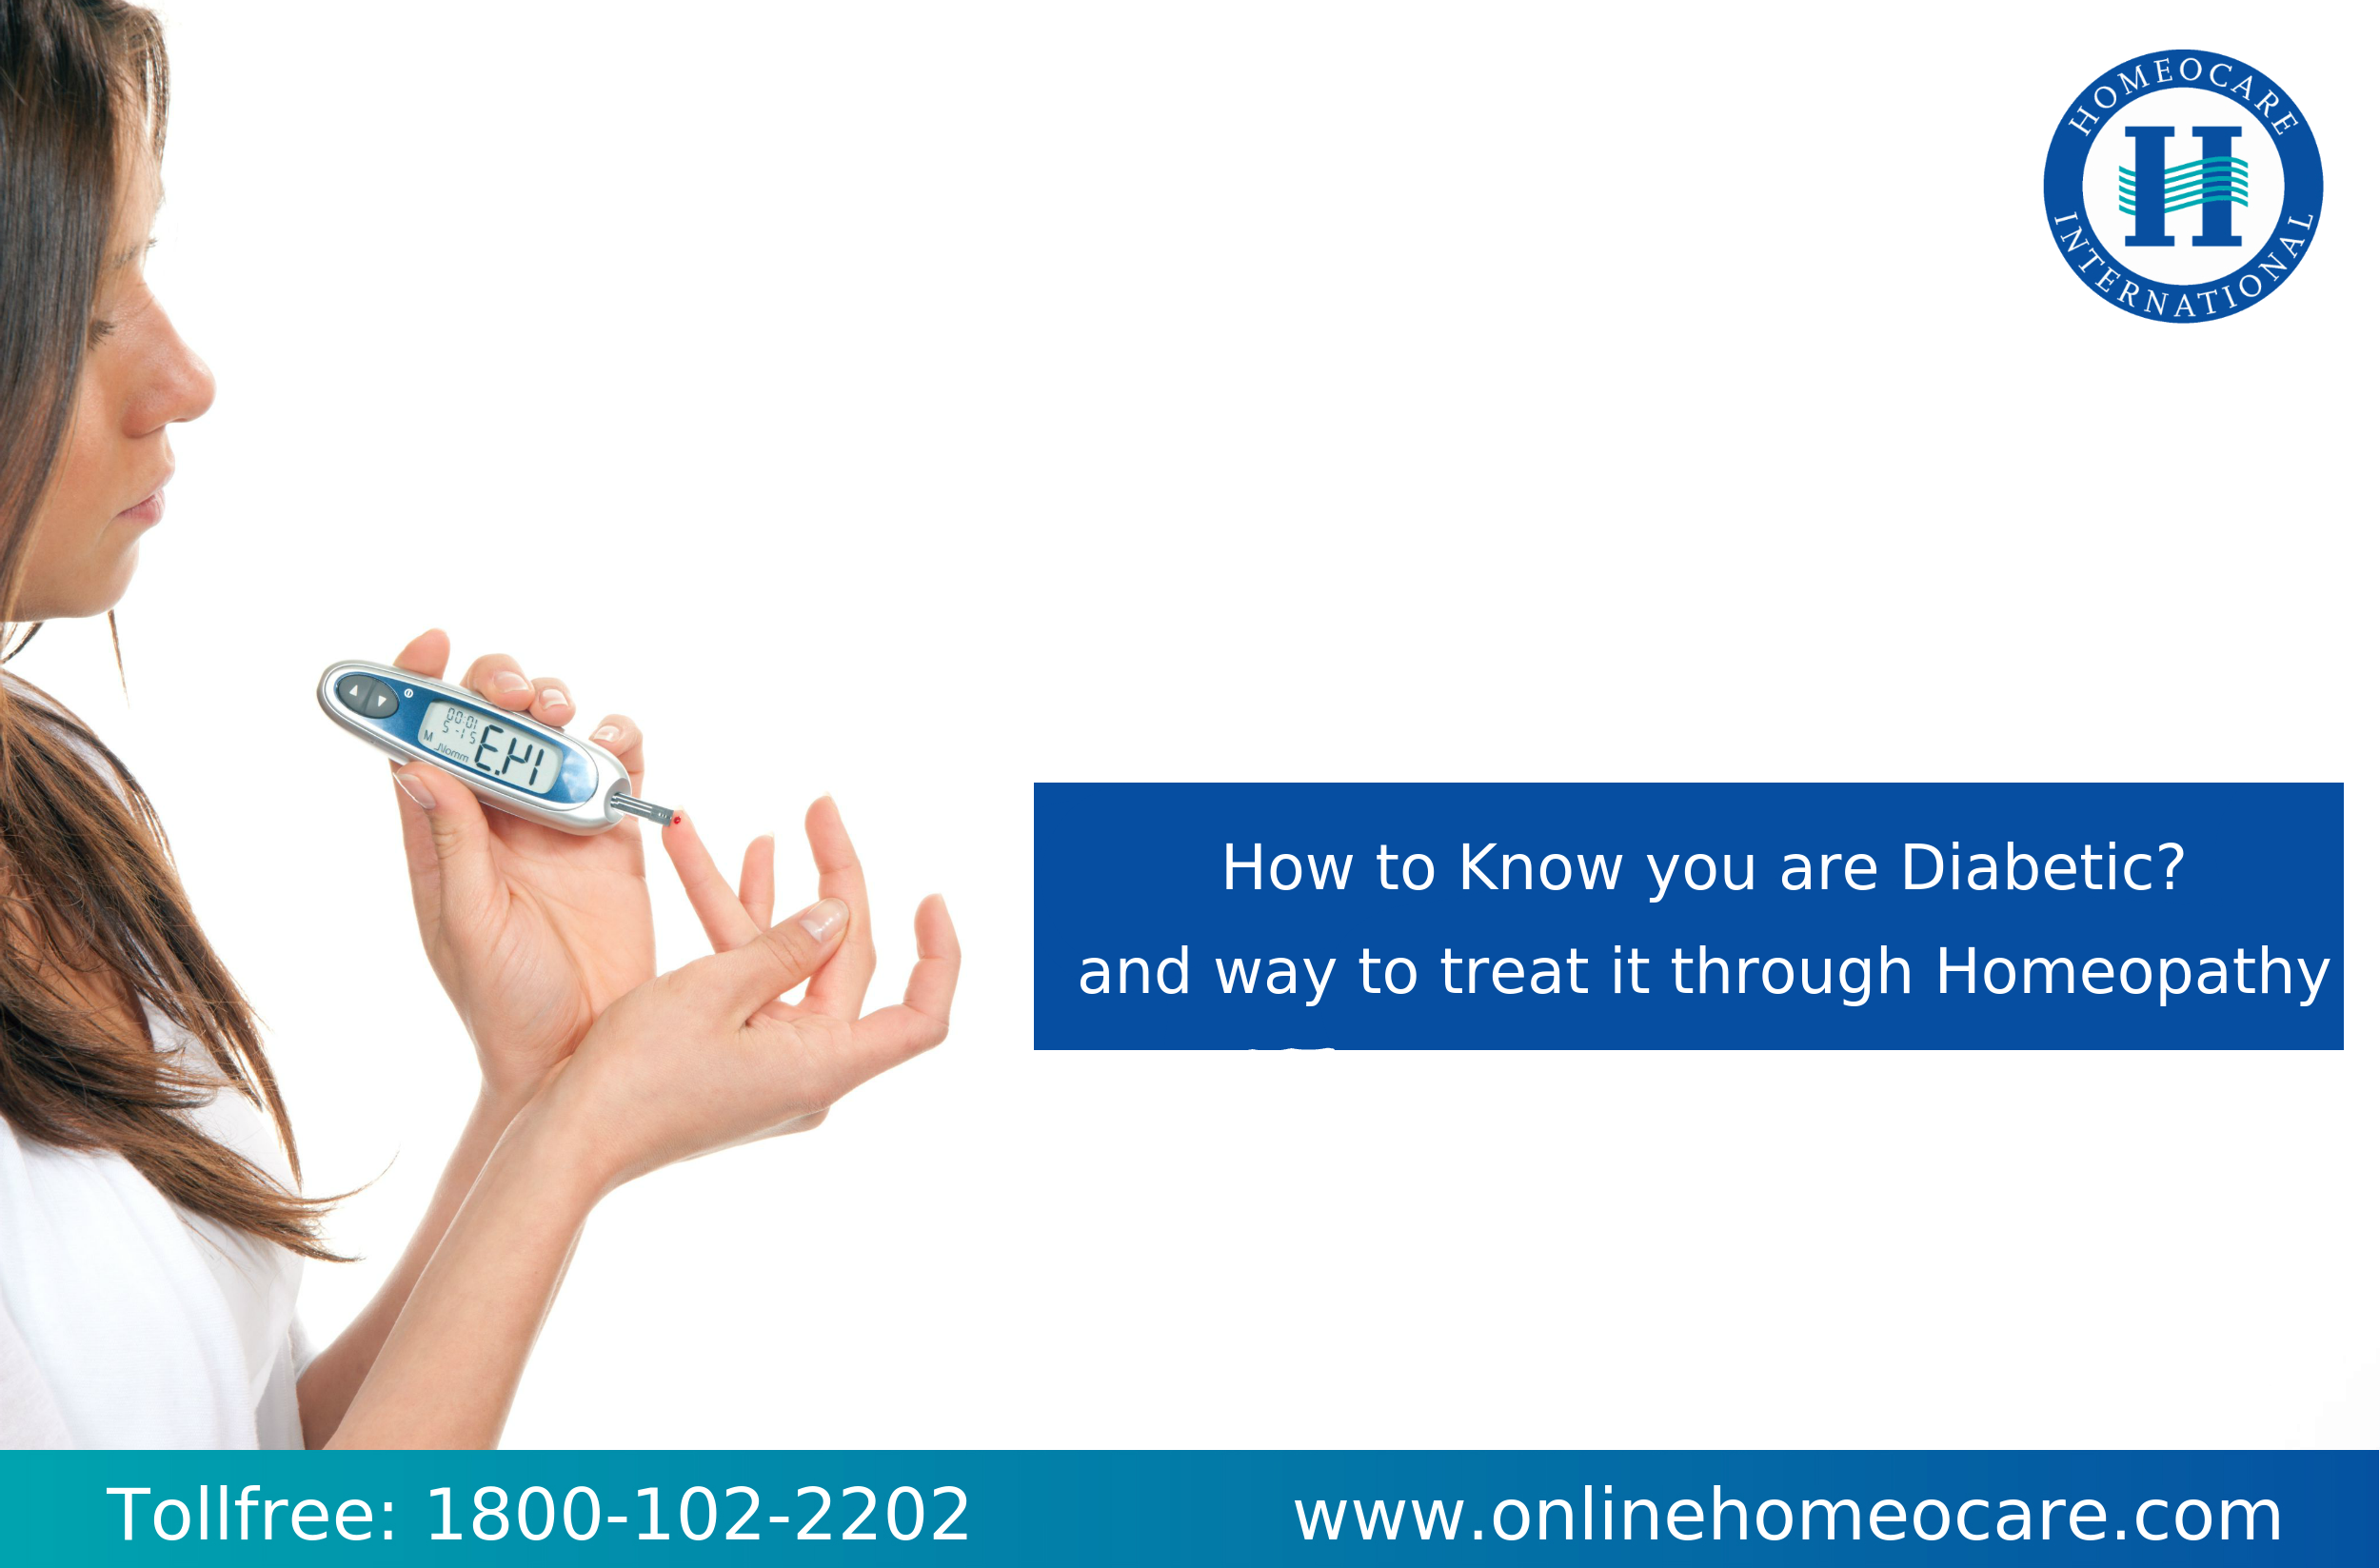 How to know you are diabetic and way to treat it